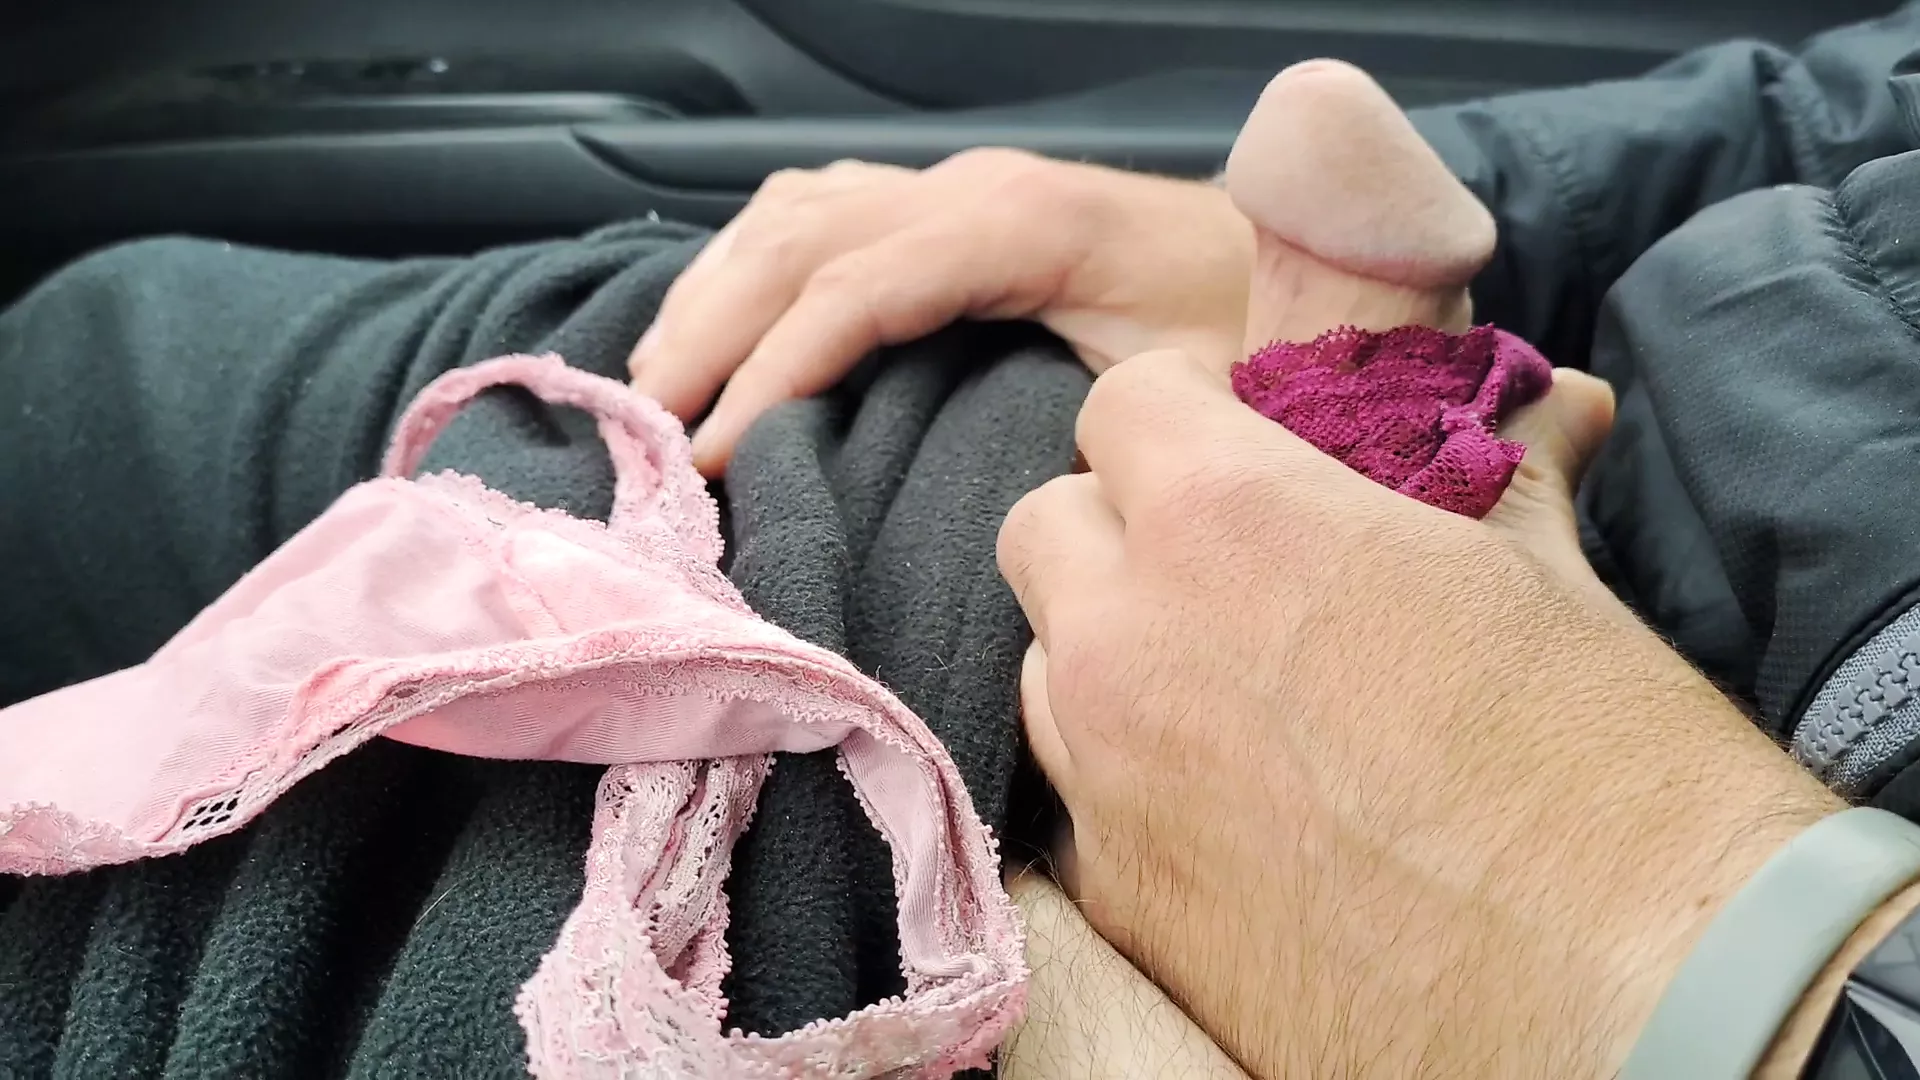 Guy uses my wifes panties to jack off and cum in car in pic